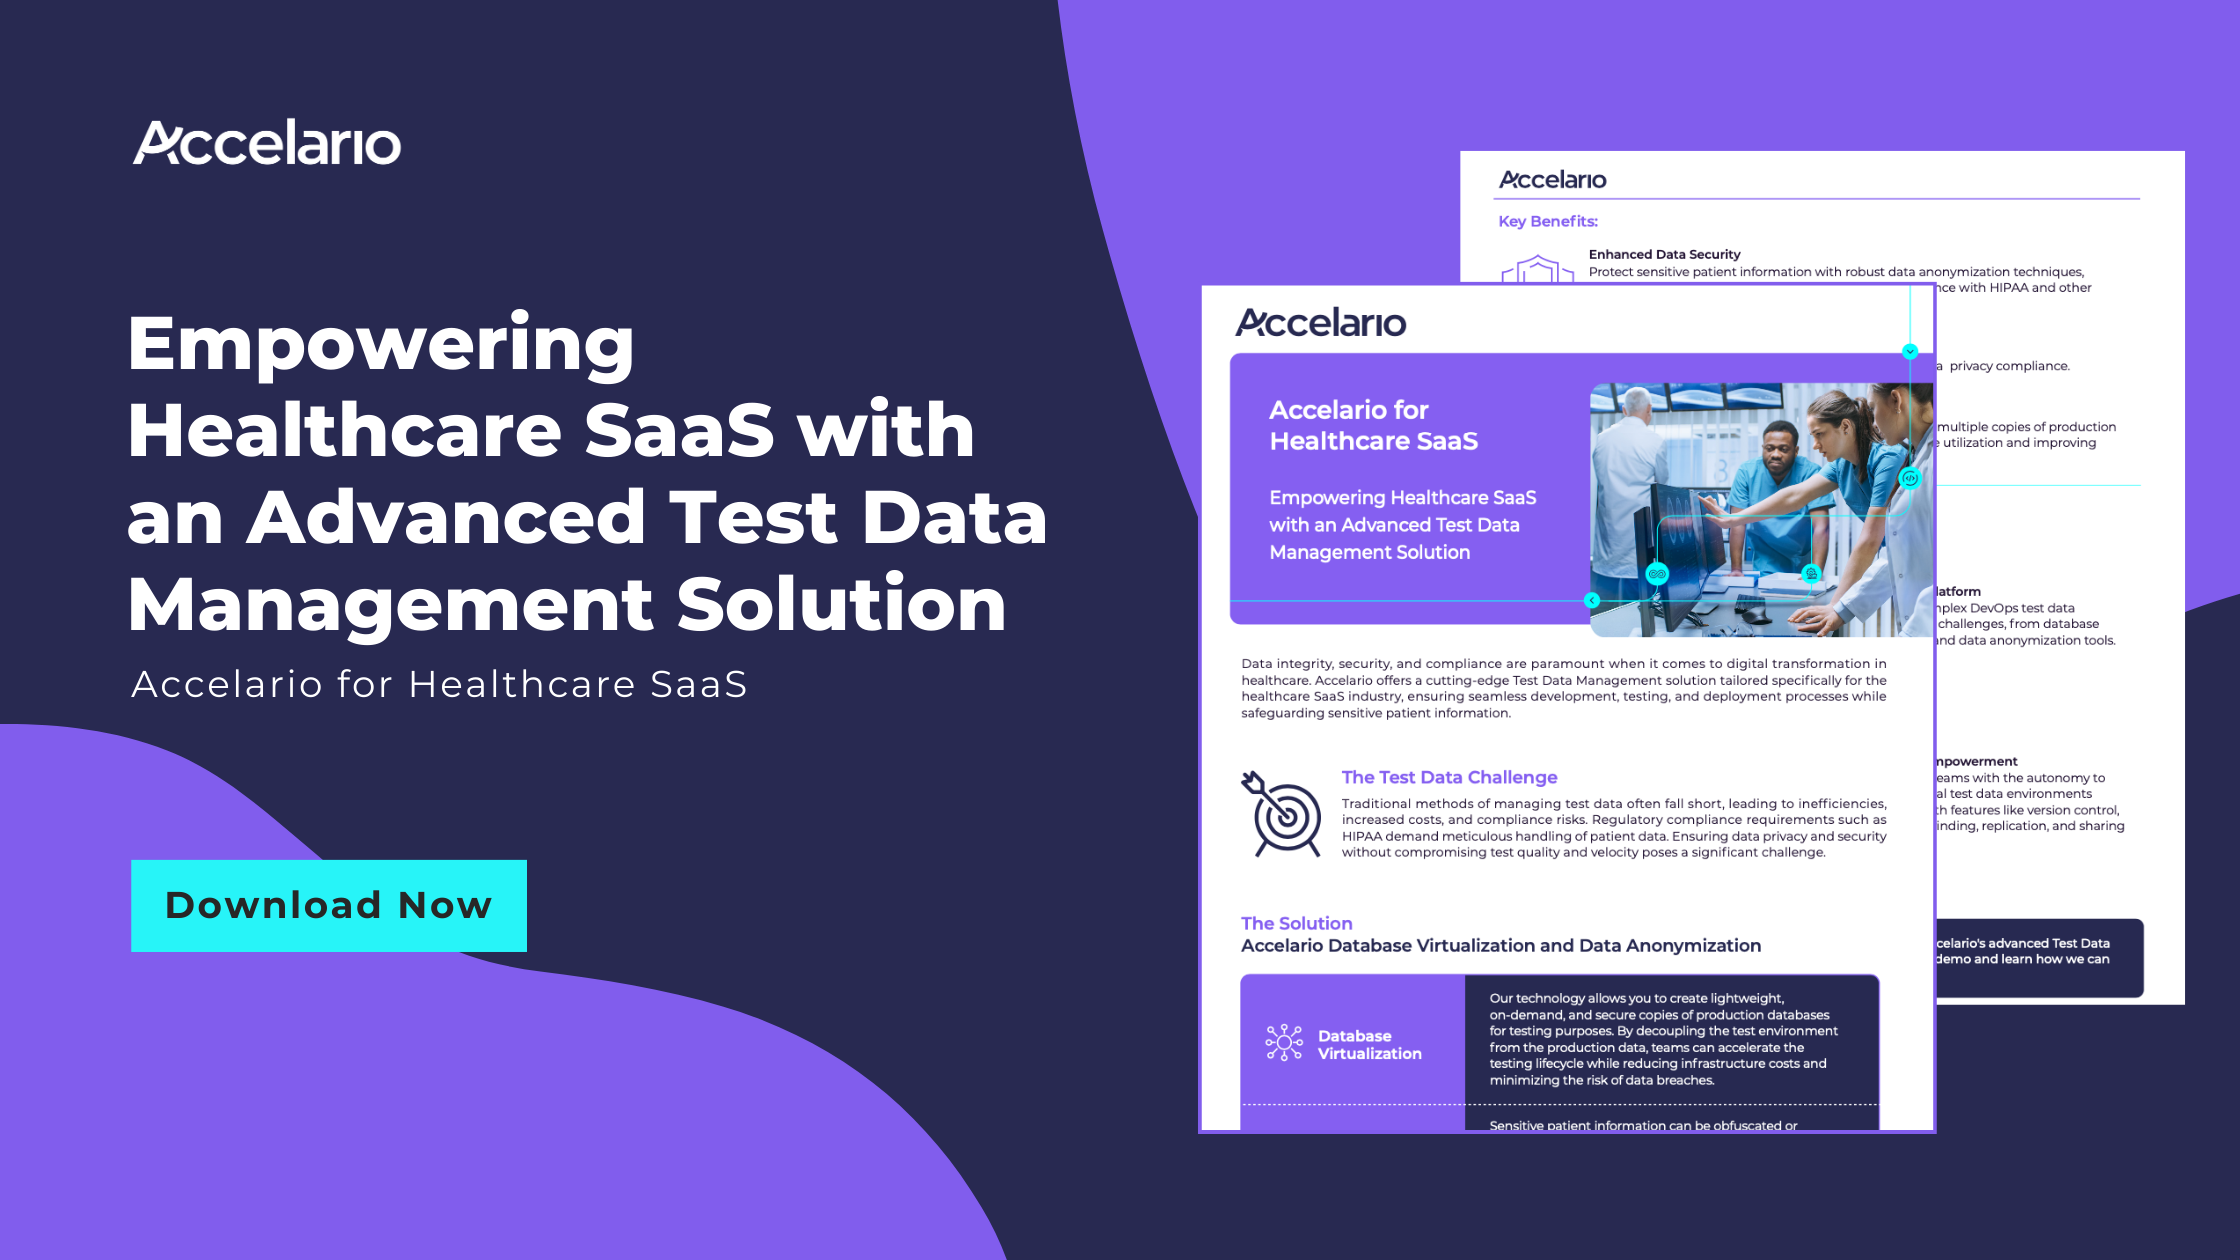 Empowering Healthcare SaaS with an Advanced Test Data Management Solution